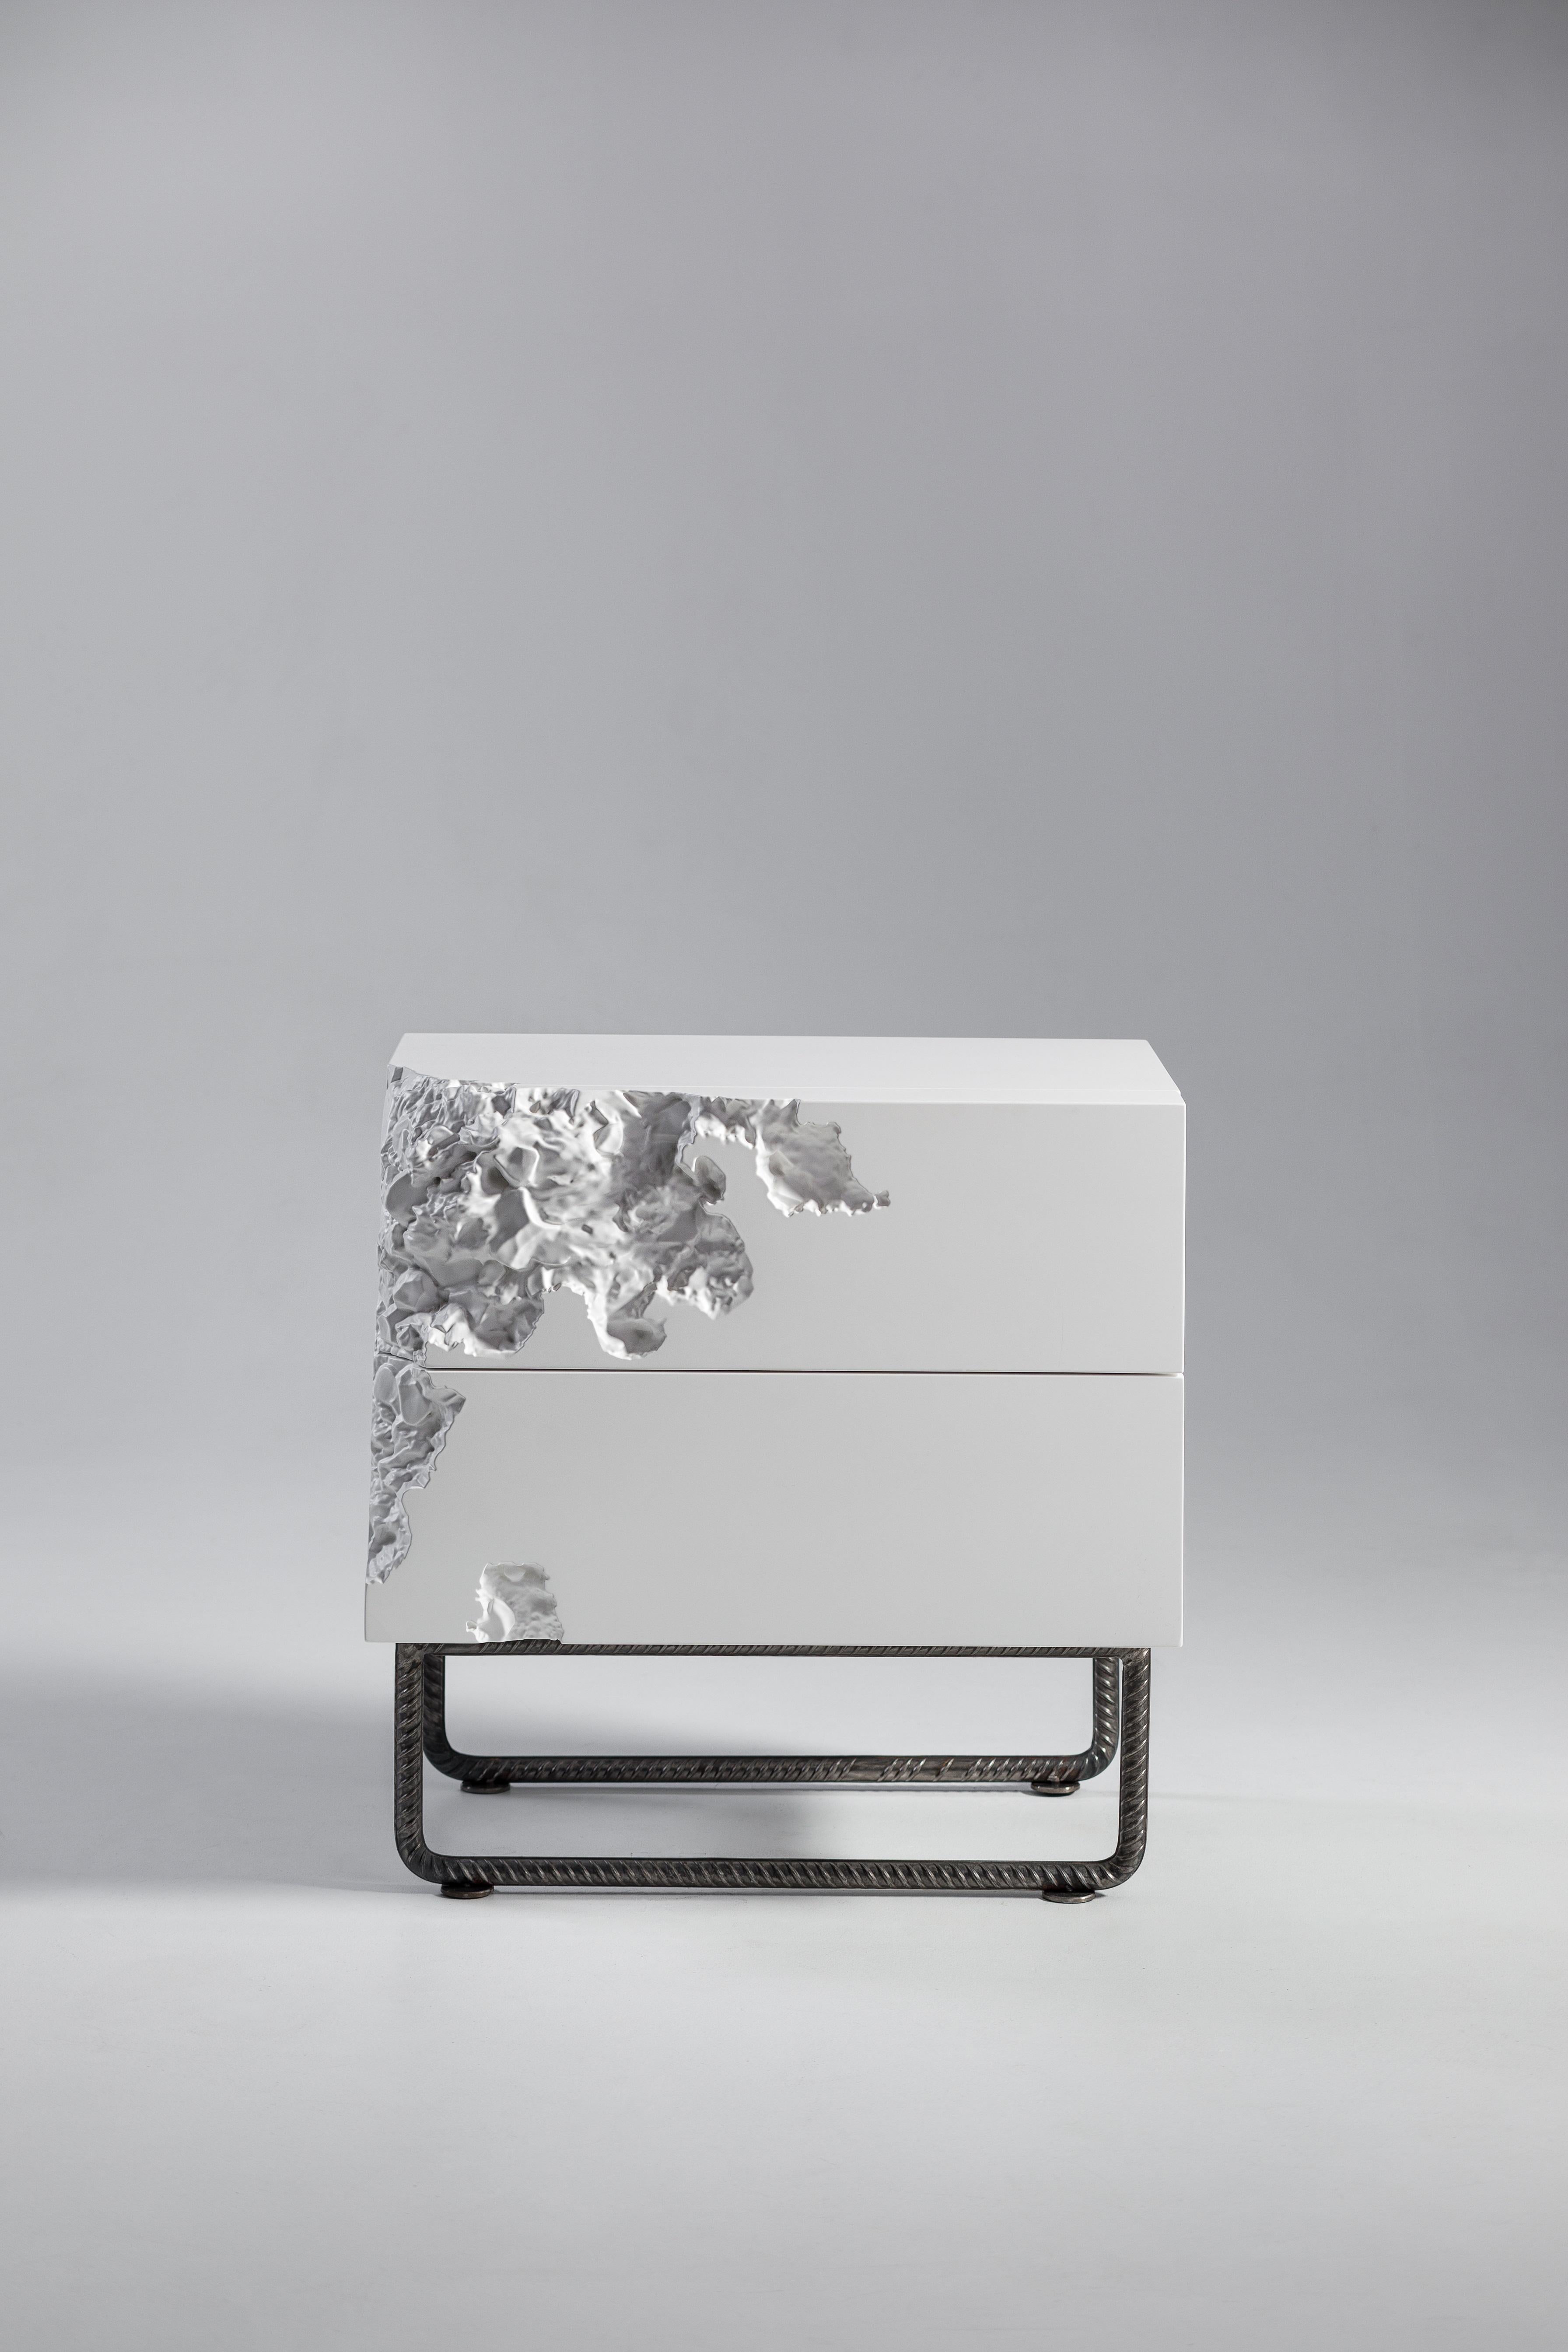 Facades of the bedside table decorated with asymmetric milling patterns (they are not identical on the right and left curbstones). The game of contrasts of pure colors and 